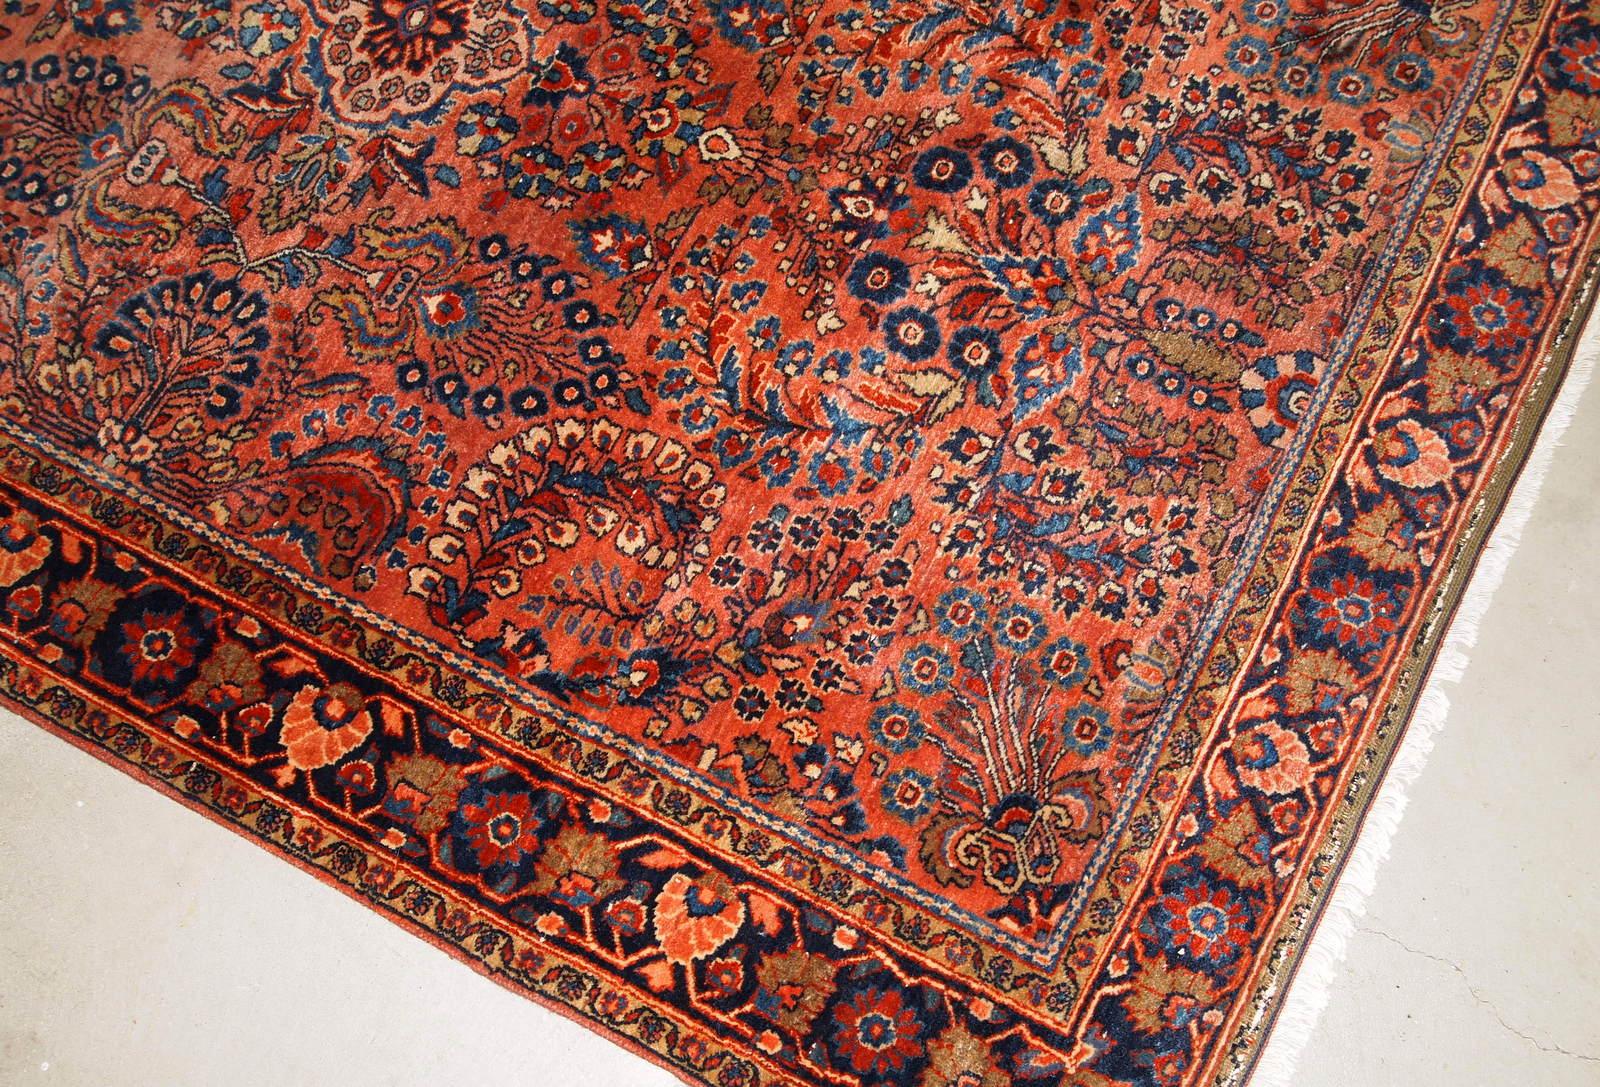 Handmade antique Sarouk rug in original good condition. The rug has been made in the beginning of 20th century in red wool.

?-Condition: original good,

-circa: 1920s,

-Size: 4.1' x 6.5' (125cm x 198cm),

-Material: wool,

-Country of